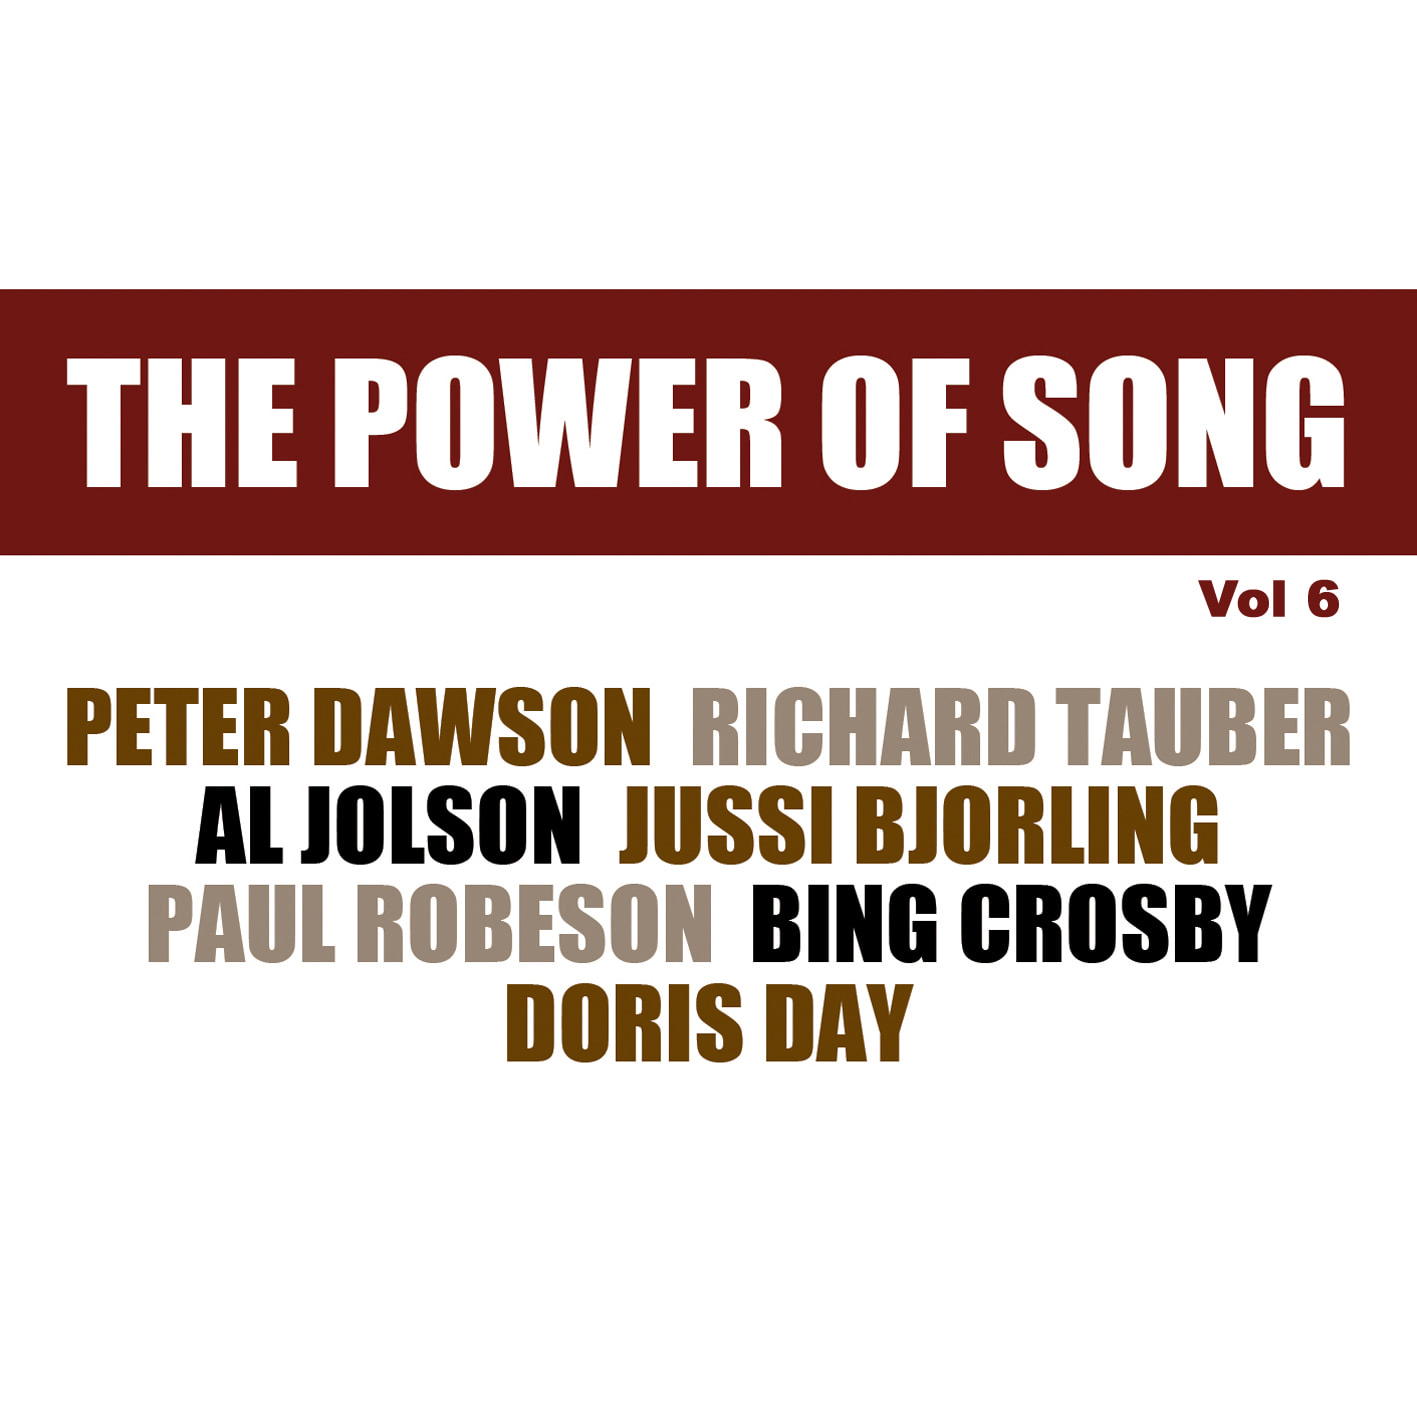 The Power of Song Vol 6